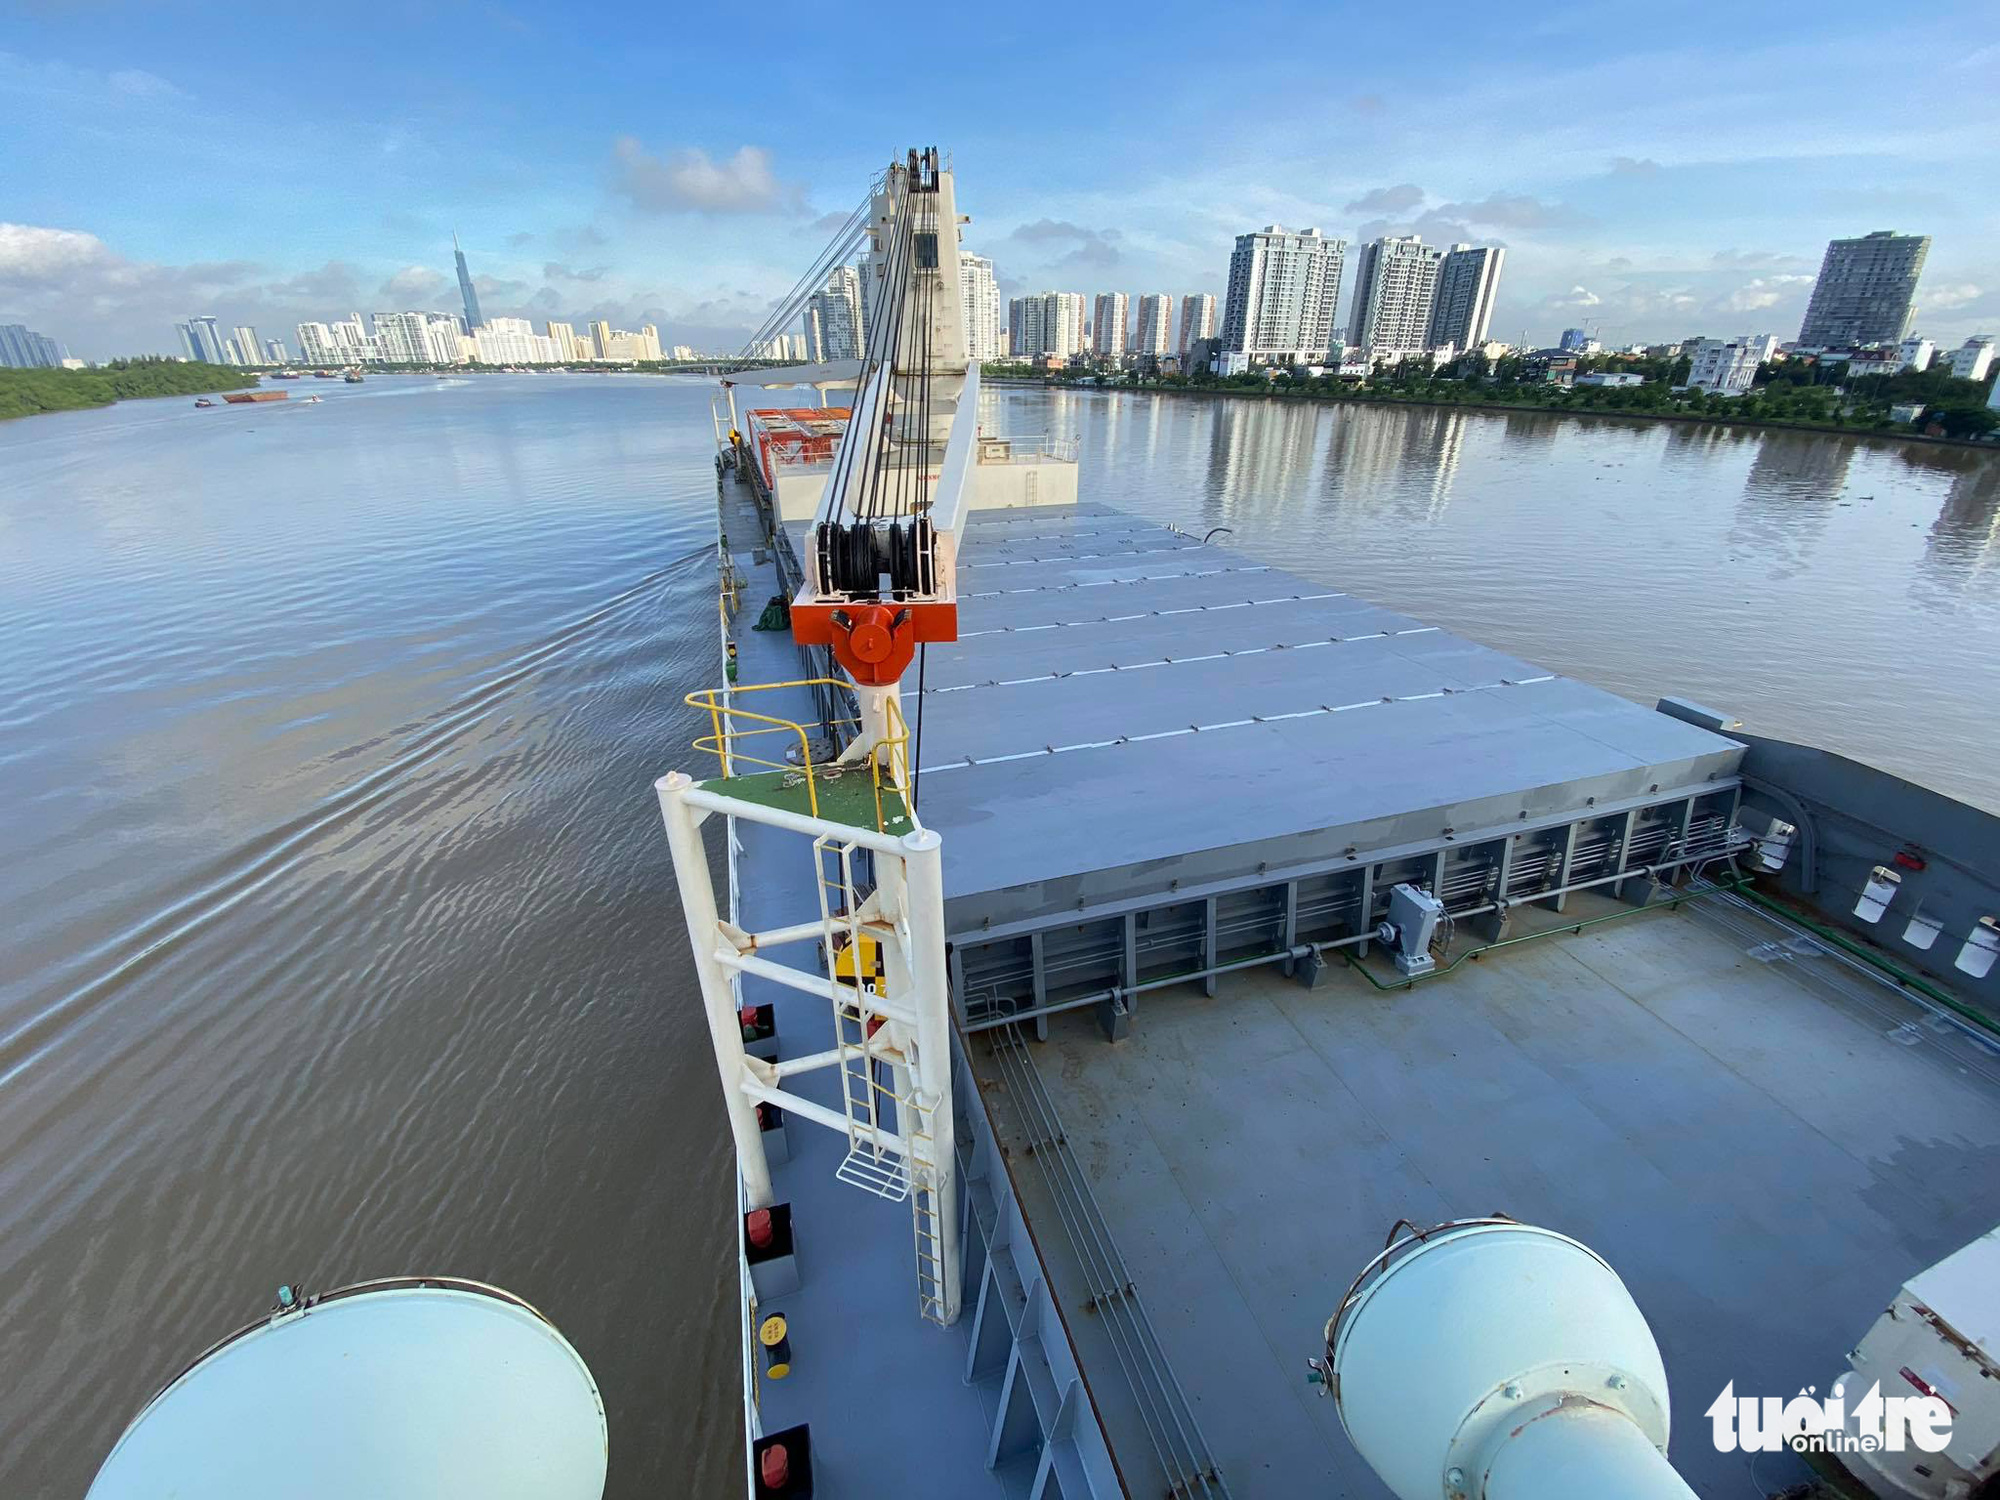 Bayani cargo vessel docks at Khanh Hoi Port in Ho Chi Minh City, October 8, 2020. Photo: Quang Dinh / Tuoi Tre